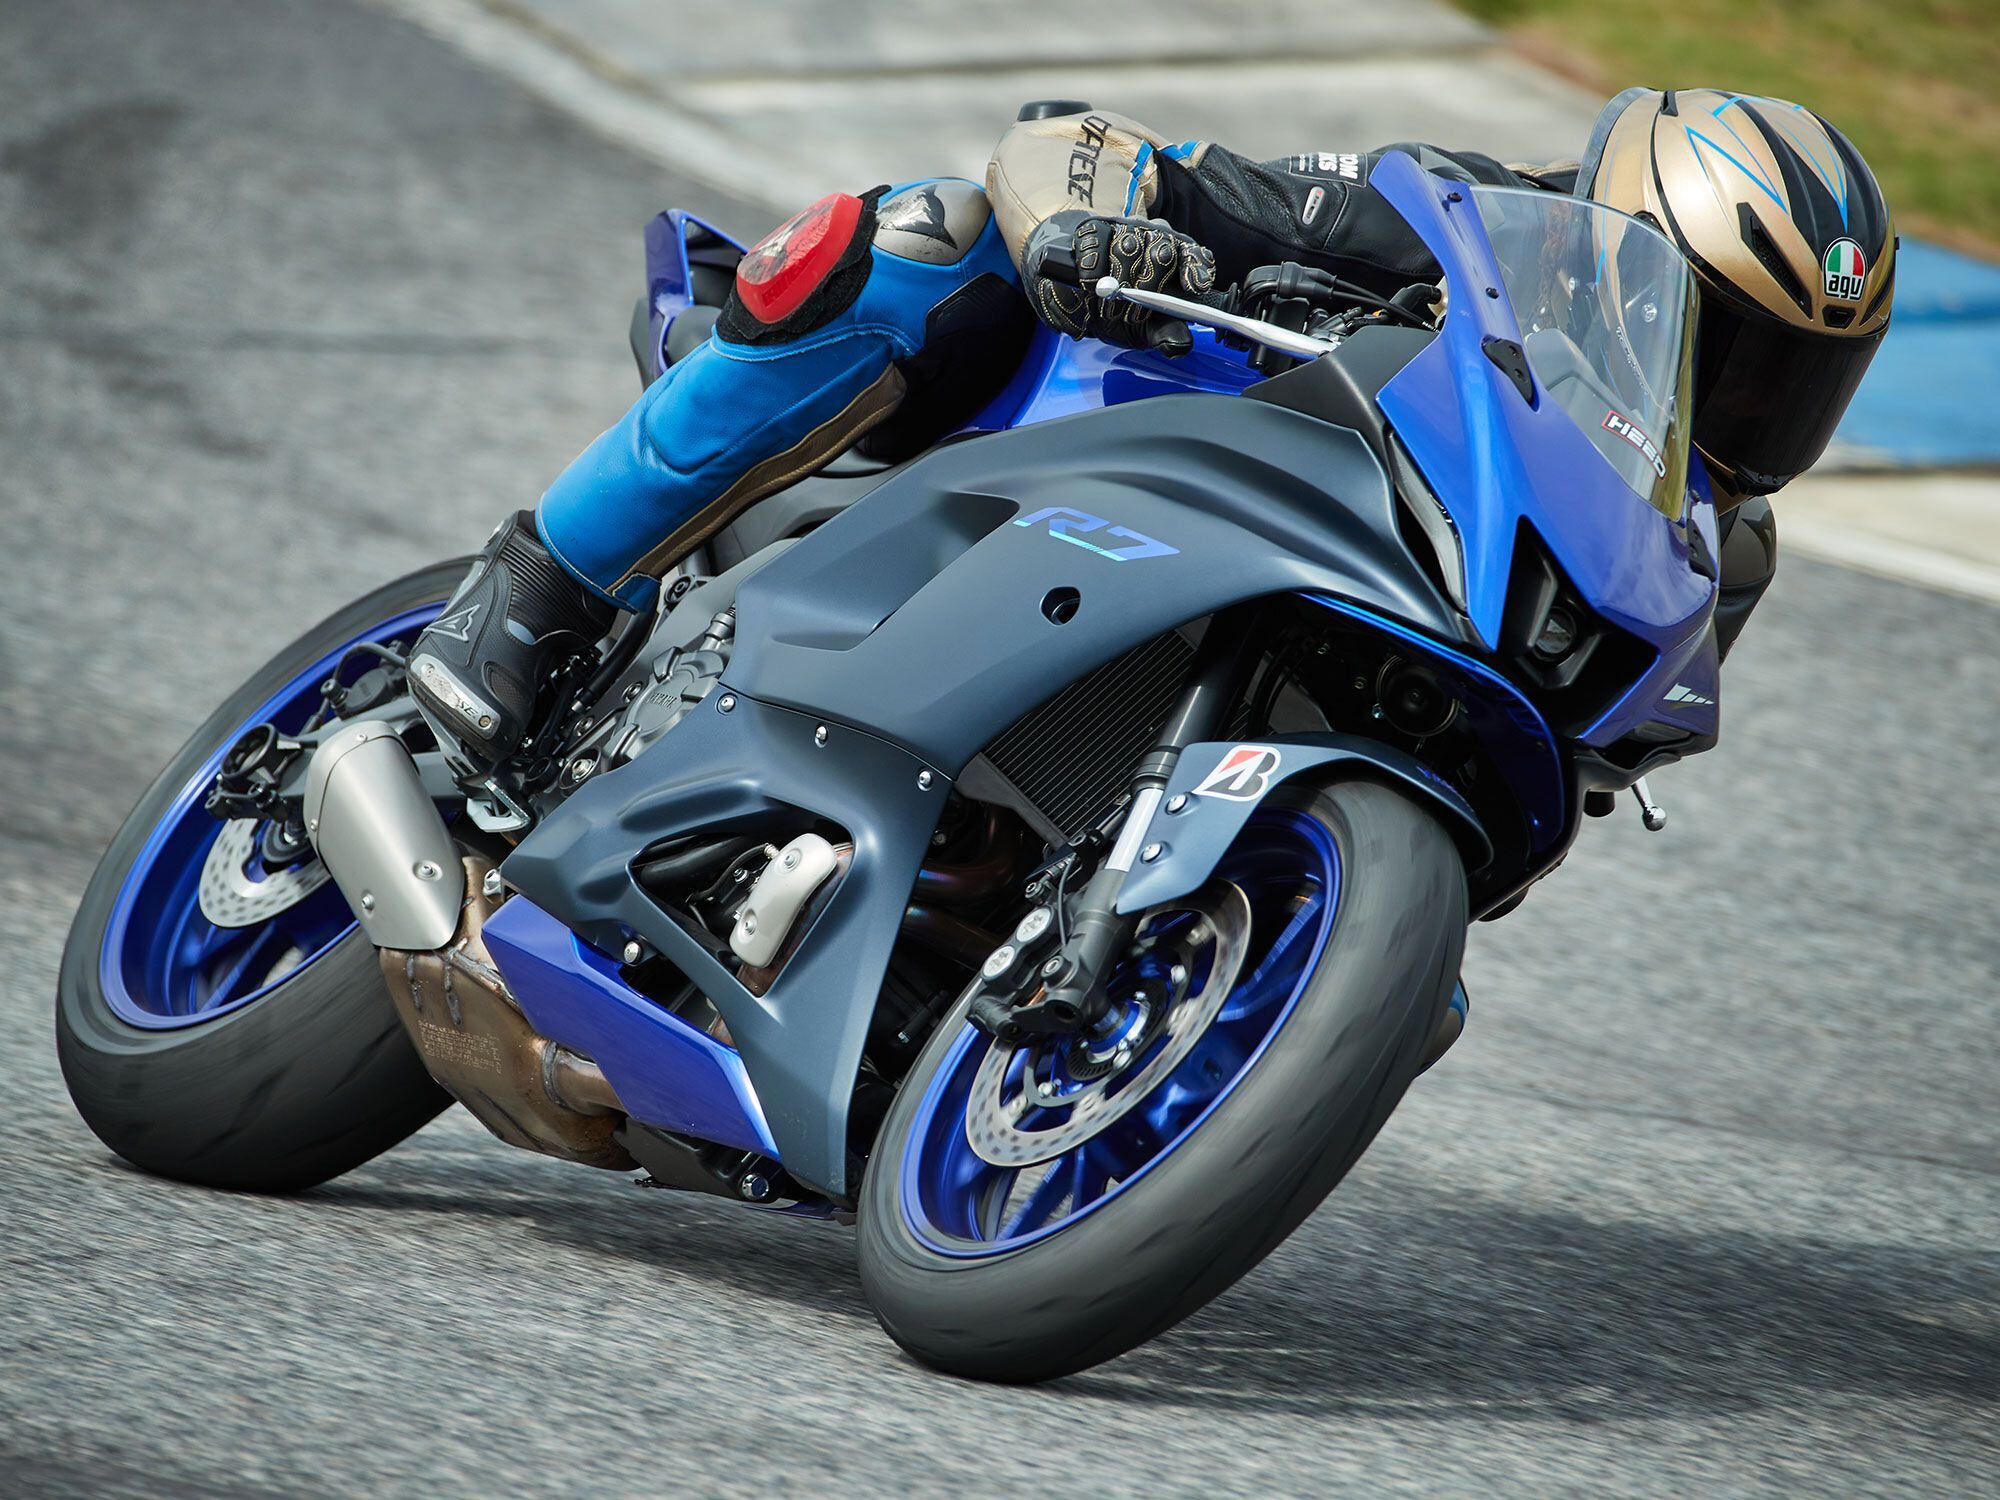 2022 Yamaha YZF-R7 MC Commute Review Photo Gallery – Bikers Family Forever